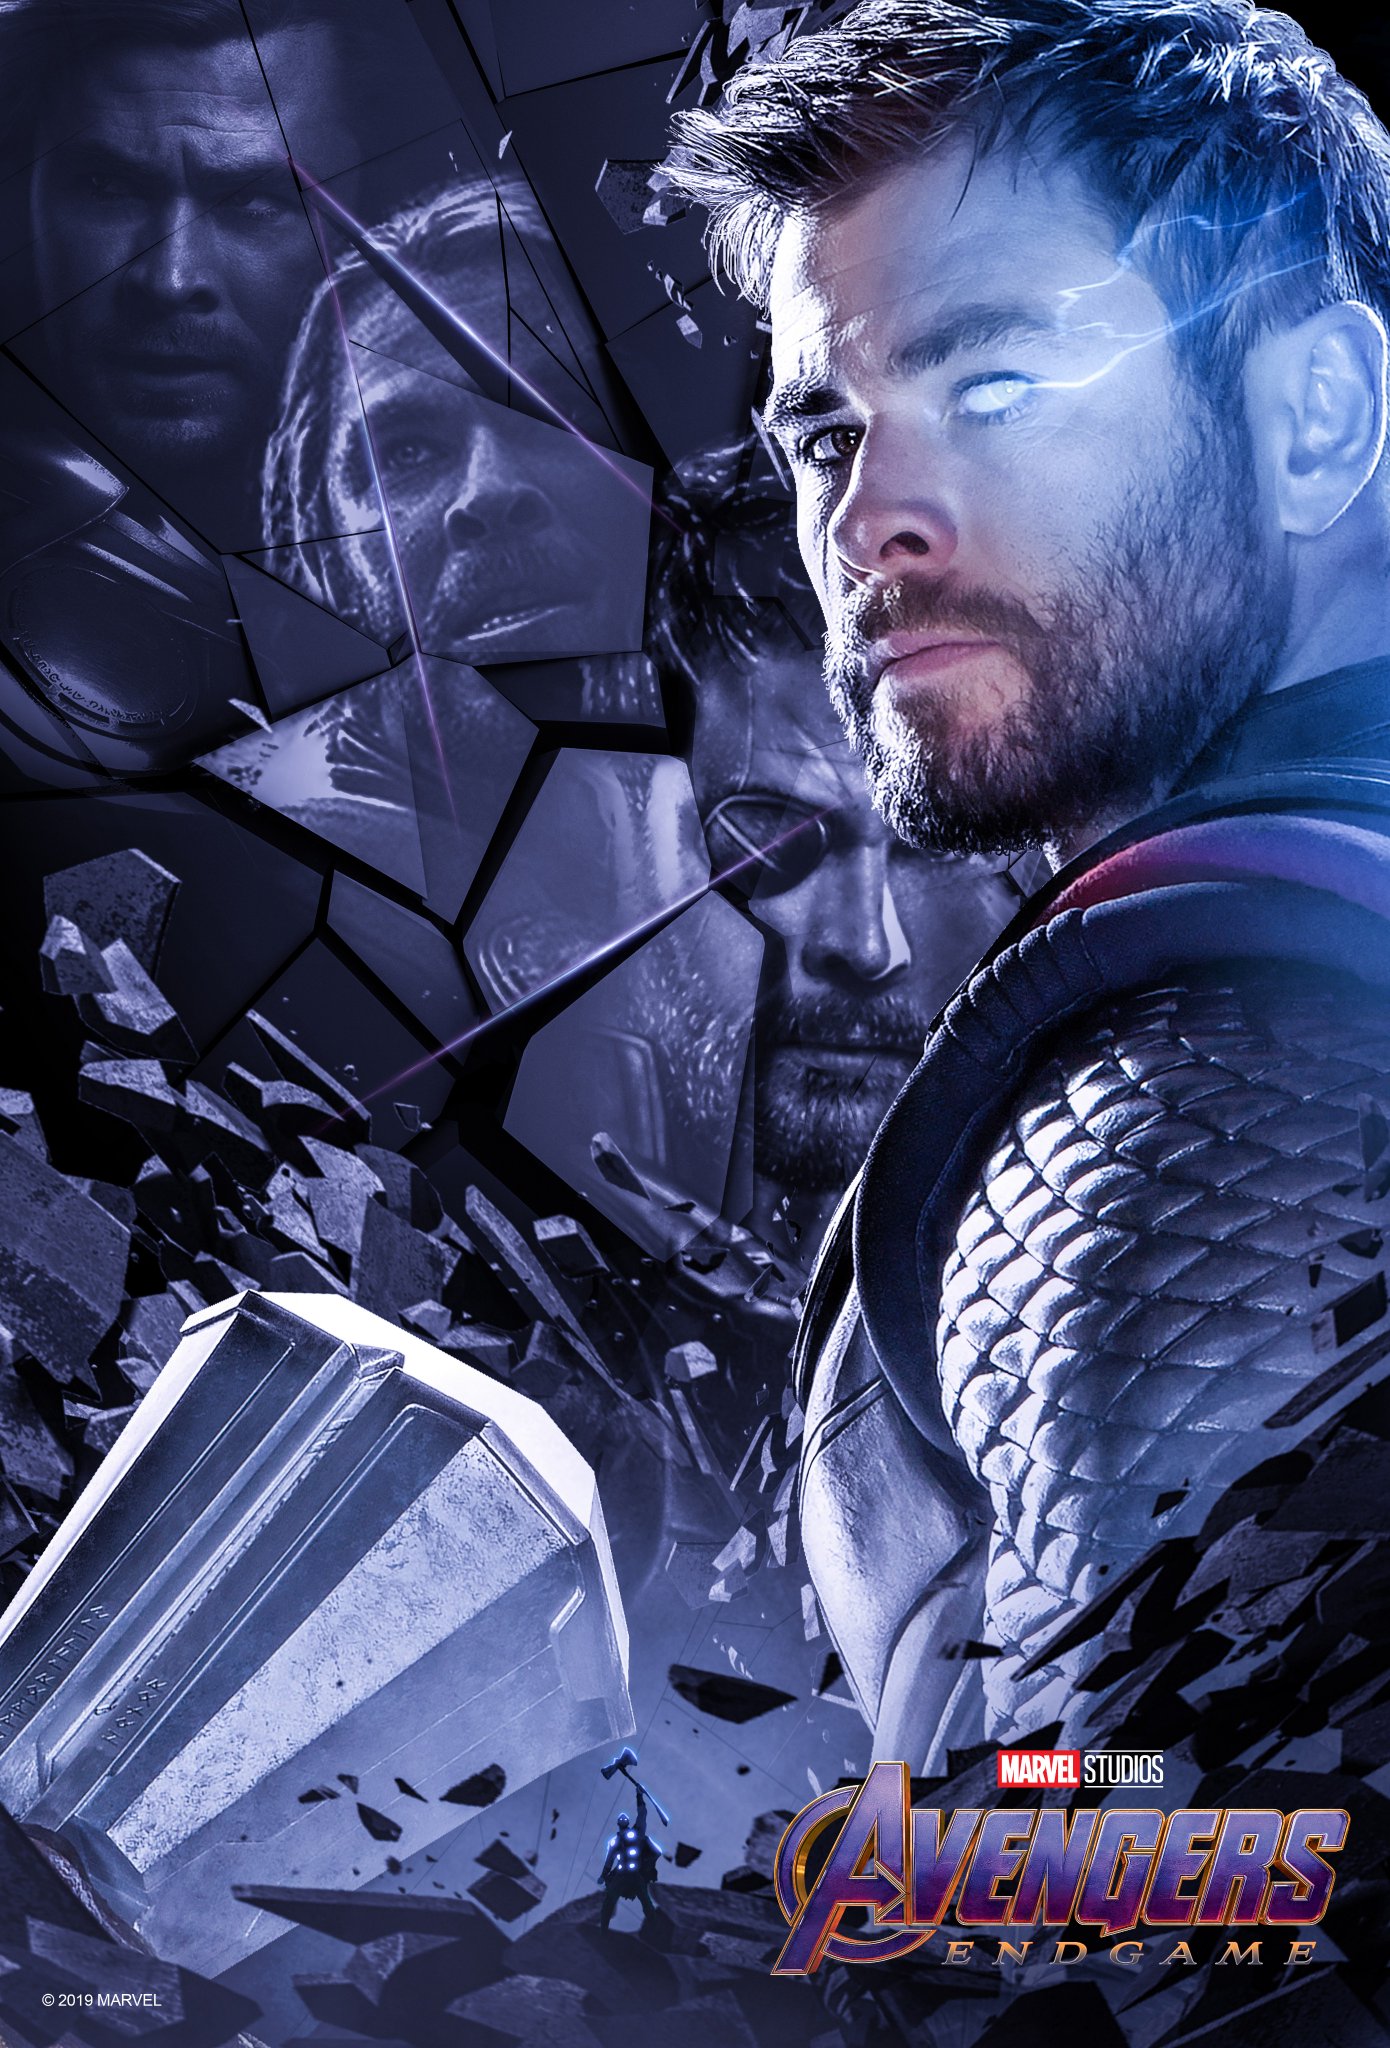 new-avengers-endgame-posters-reflect-the-legacy-of-the-six-core-team-members7